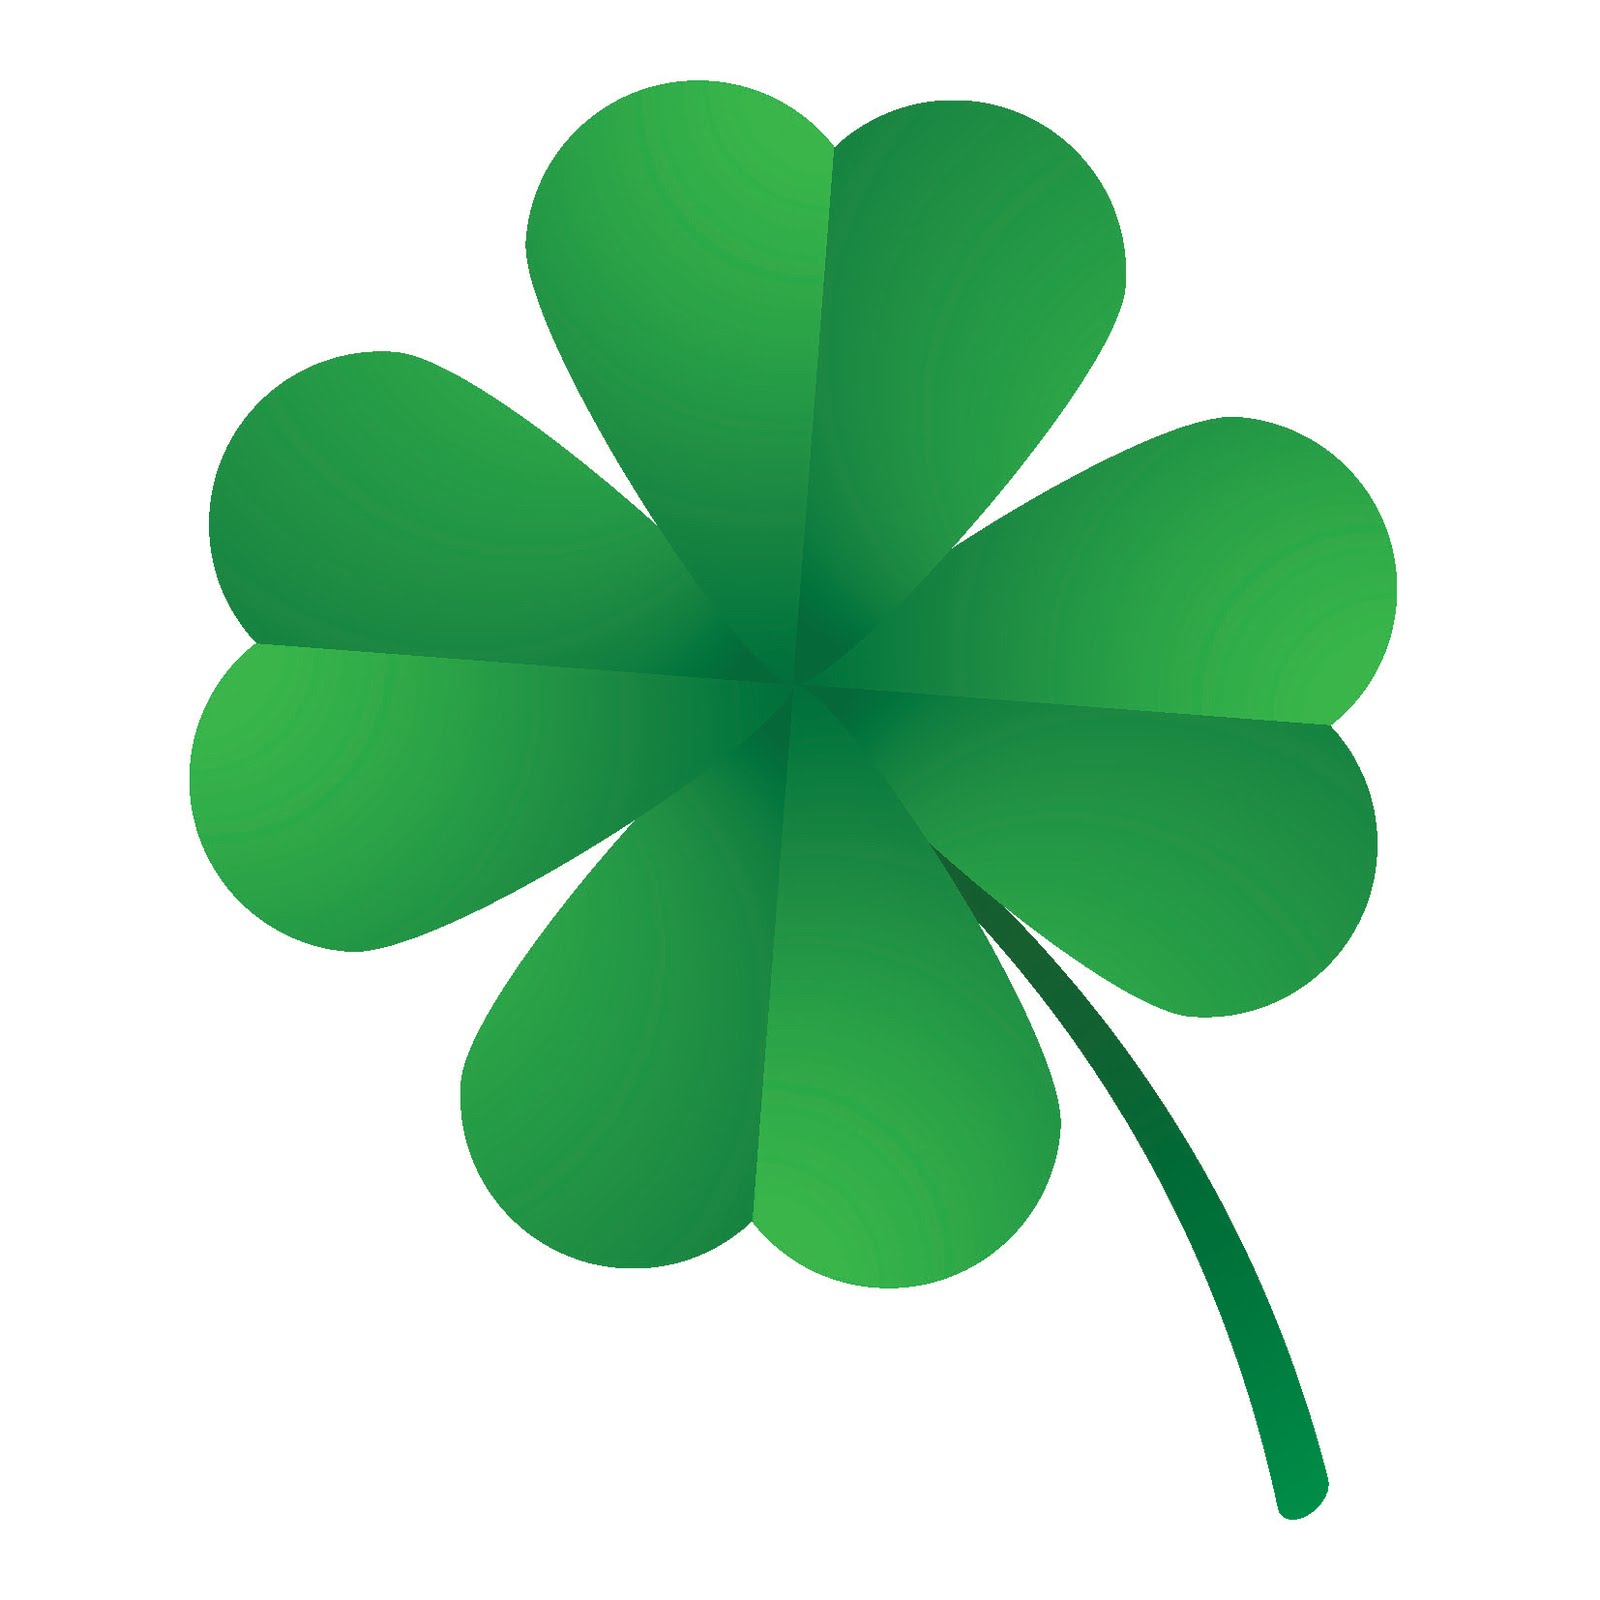 Picture Of A Clover Leaf - ClipArt Best